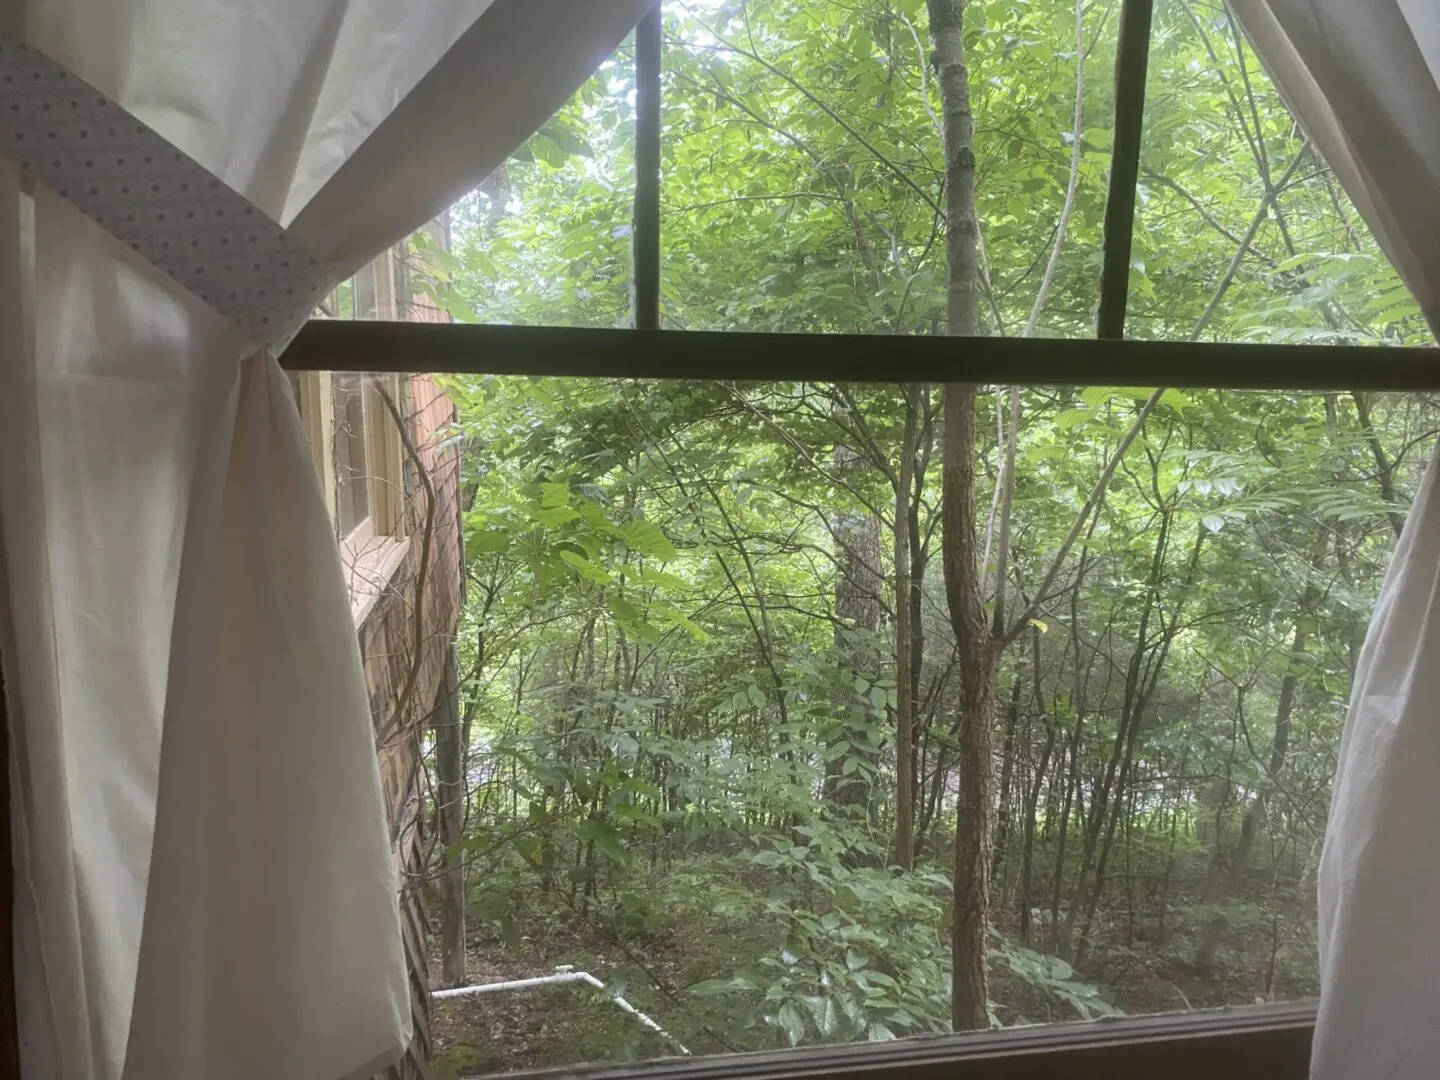 A view of trees from inside the window.